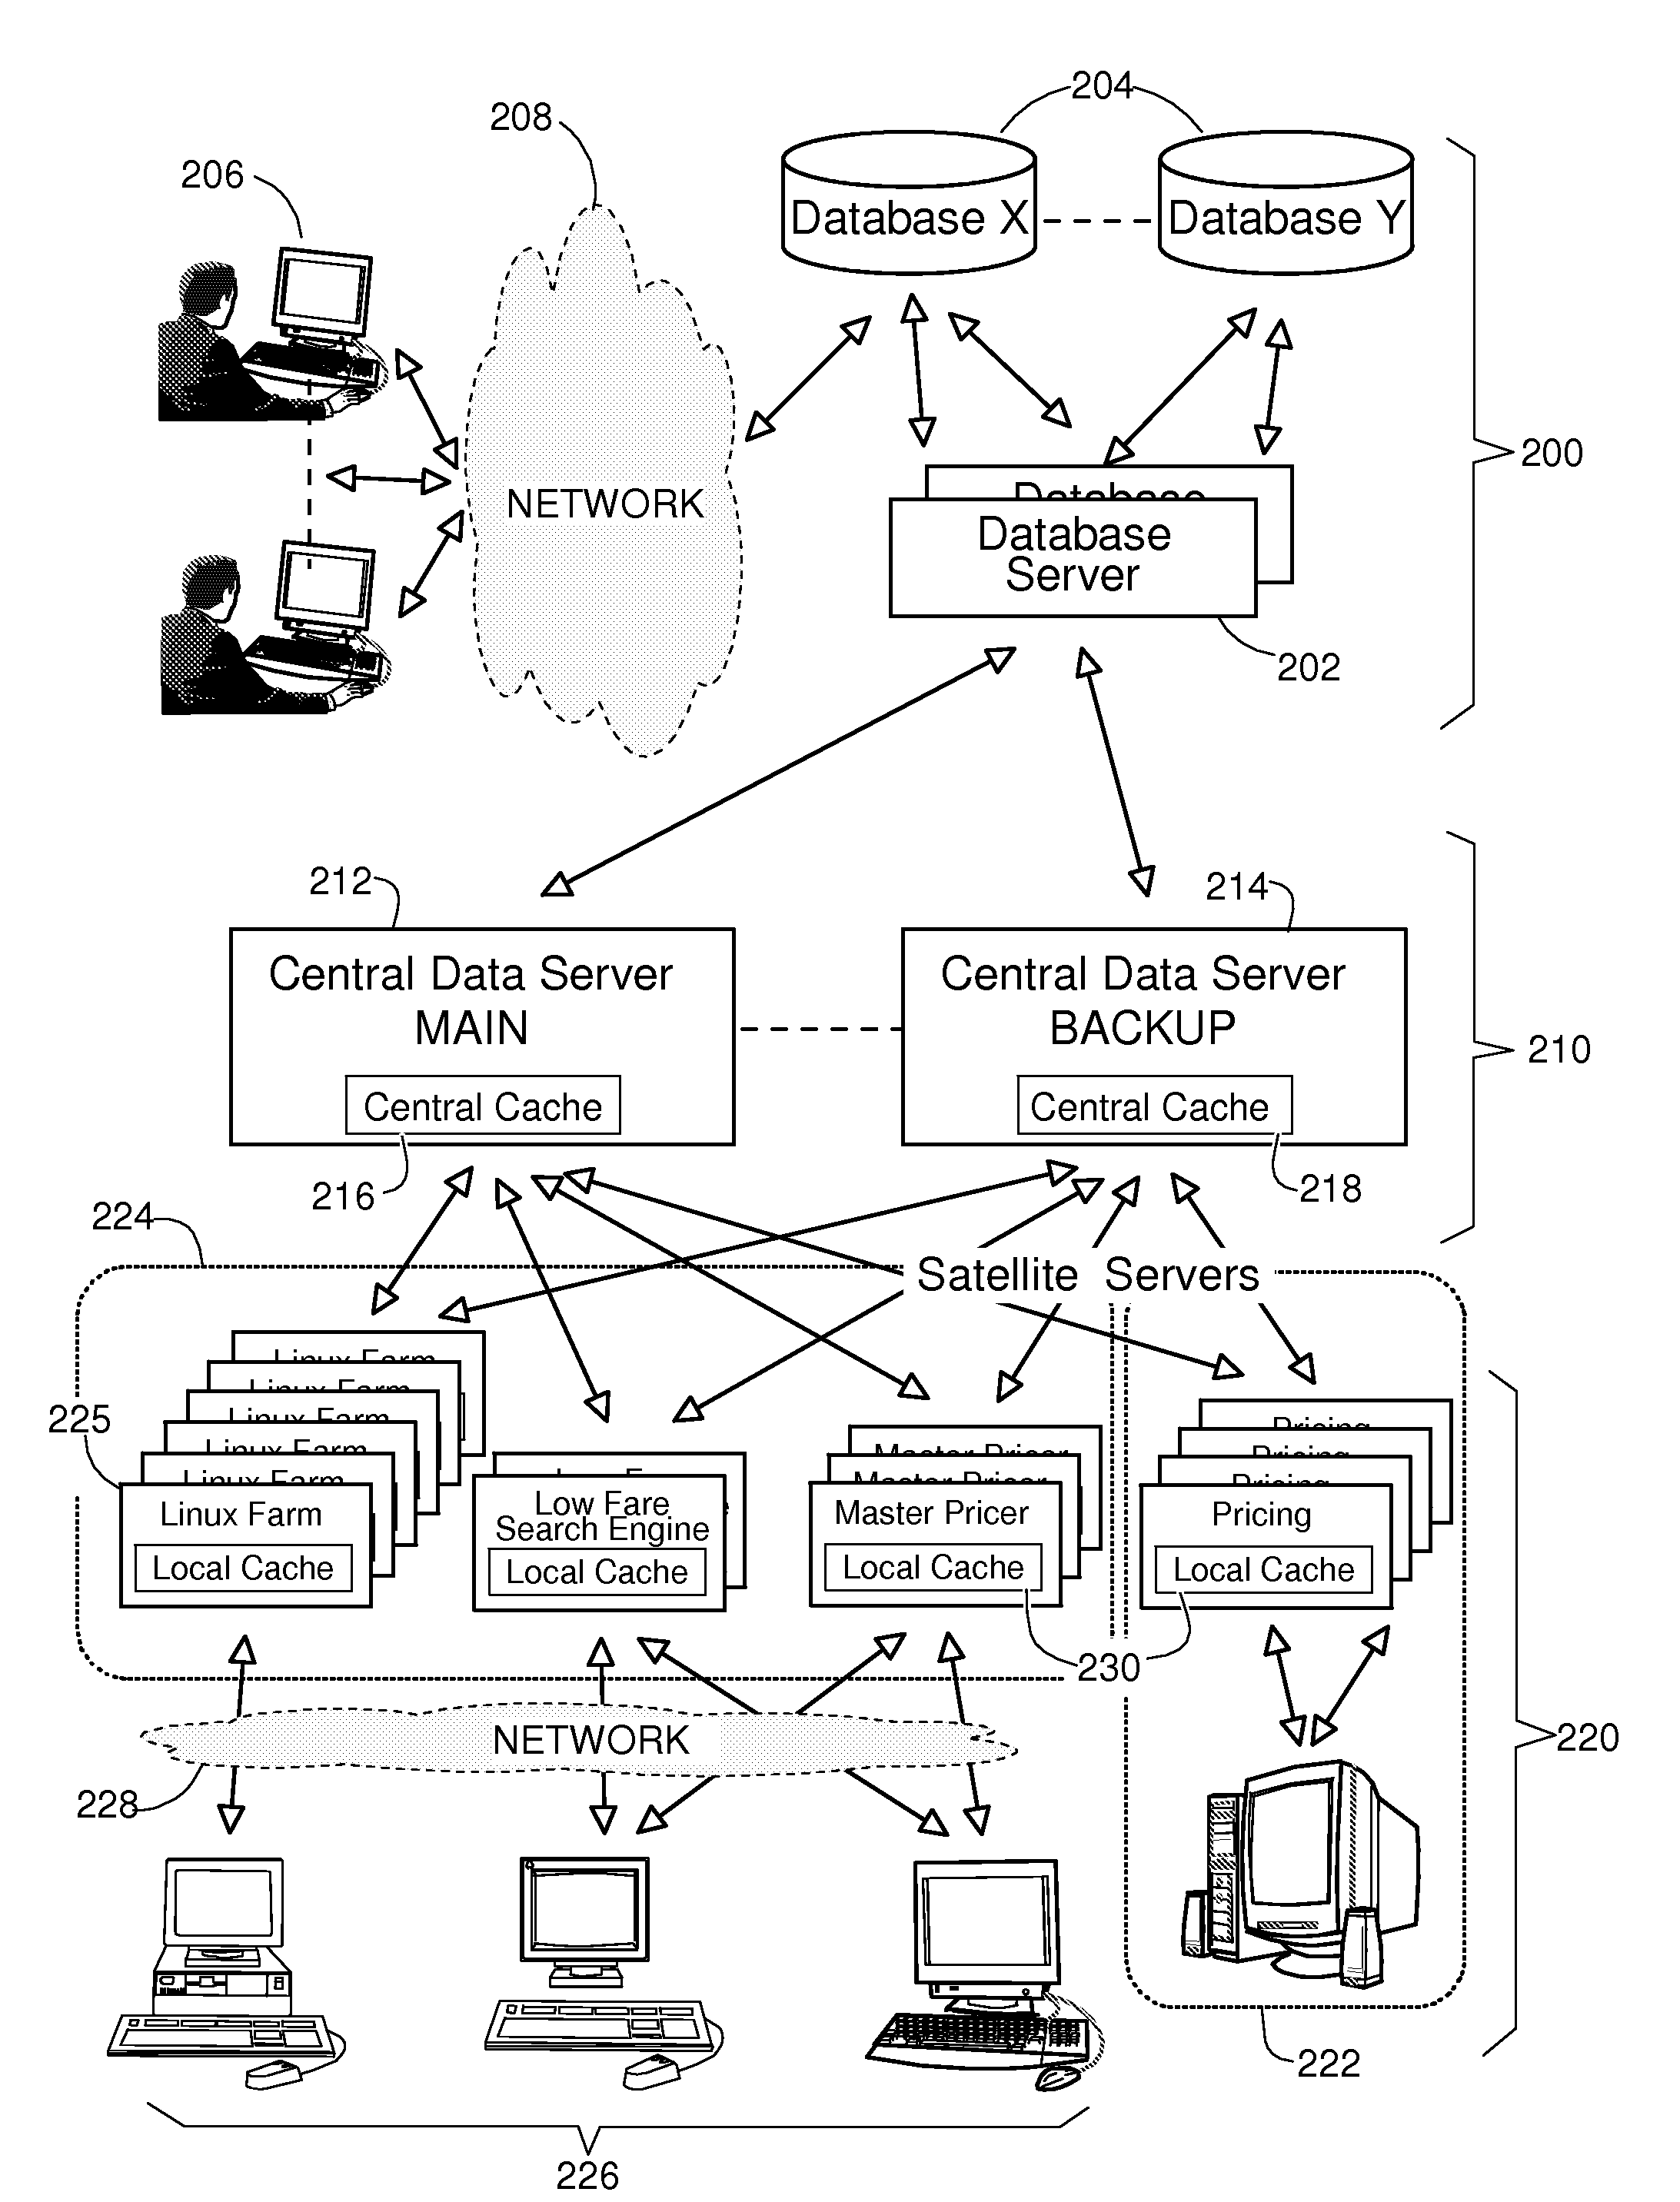 System and Method to Maintain Coherence of Cache Contents in a Multi-Tier System Aimed at Interfacing Large Databases